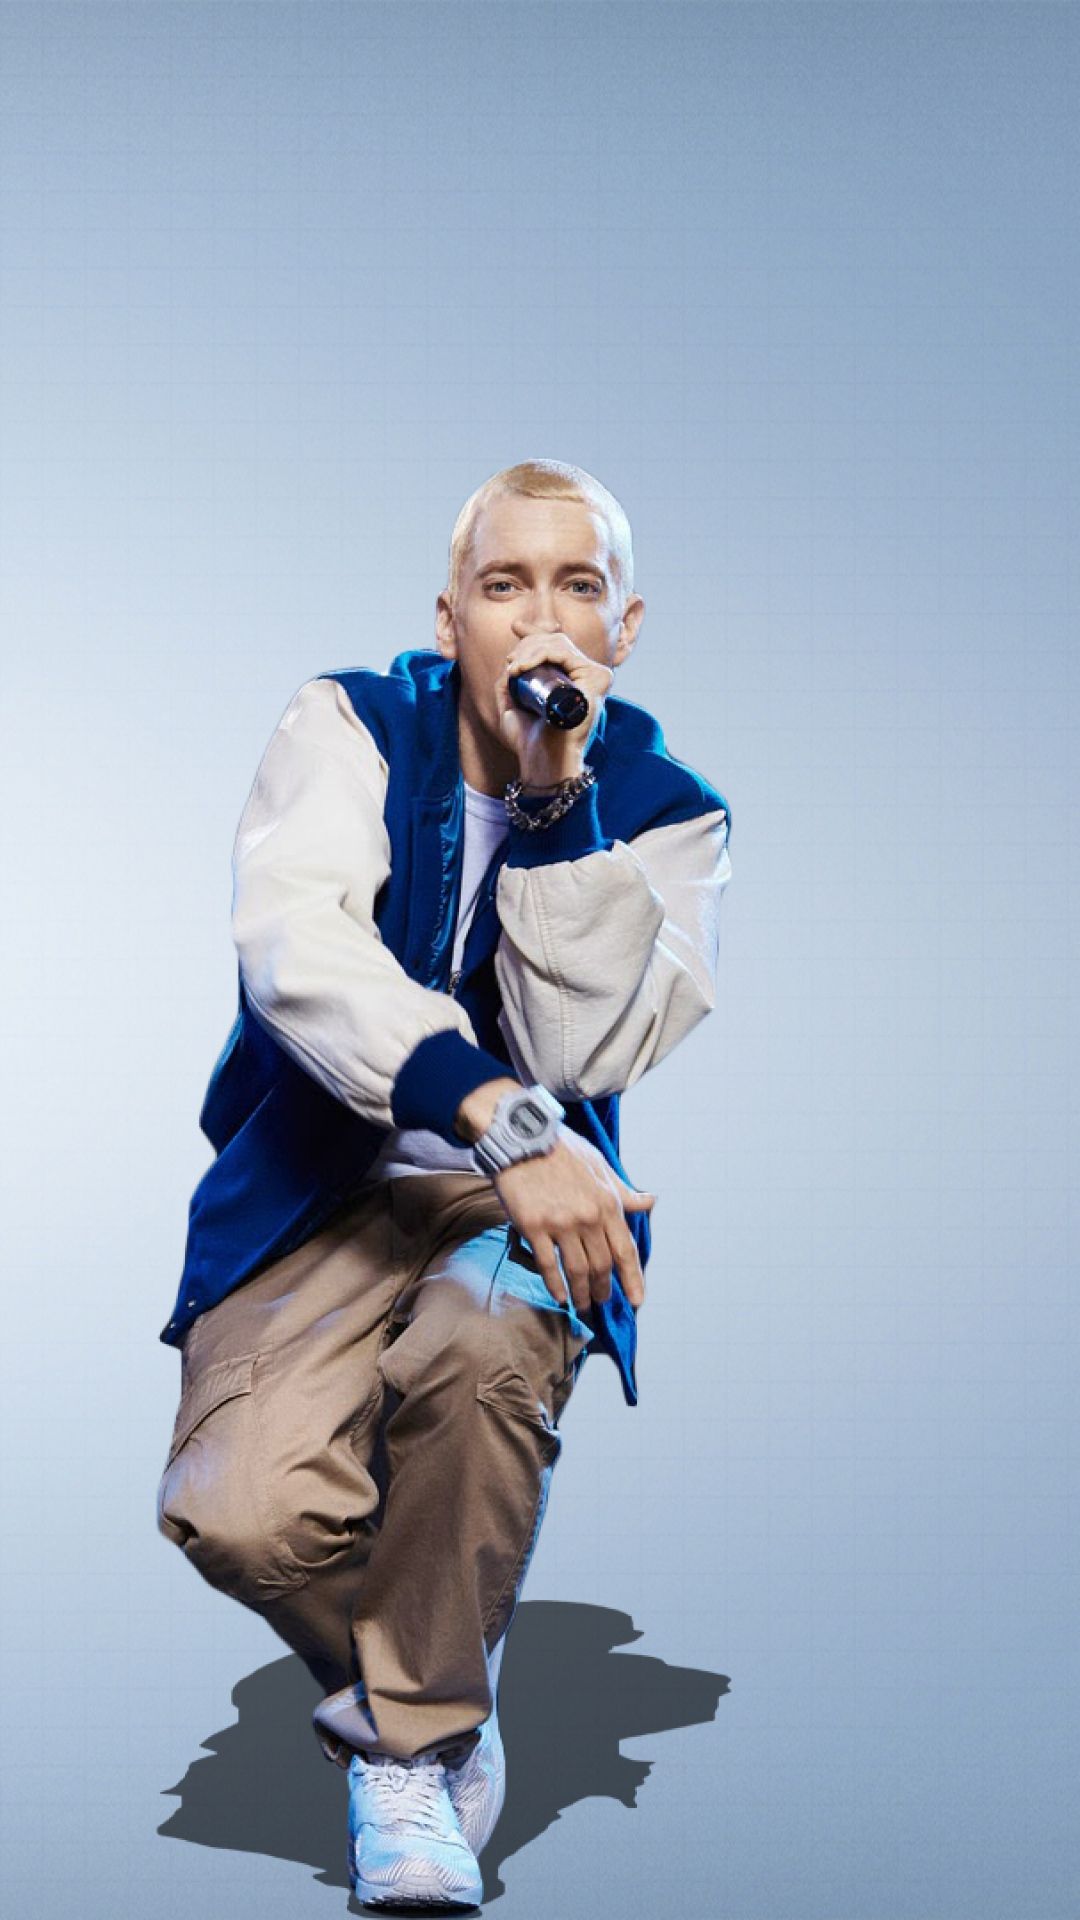 Download Eminem wallpapers for mobile phone free Eminem HD pictures